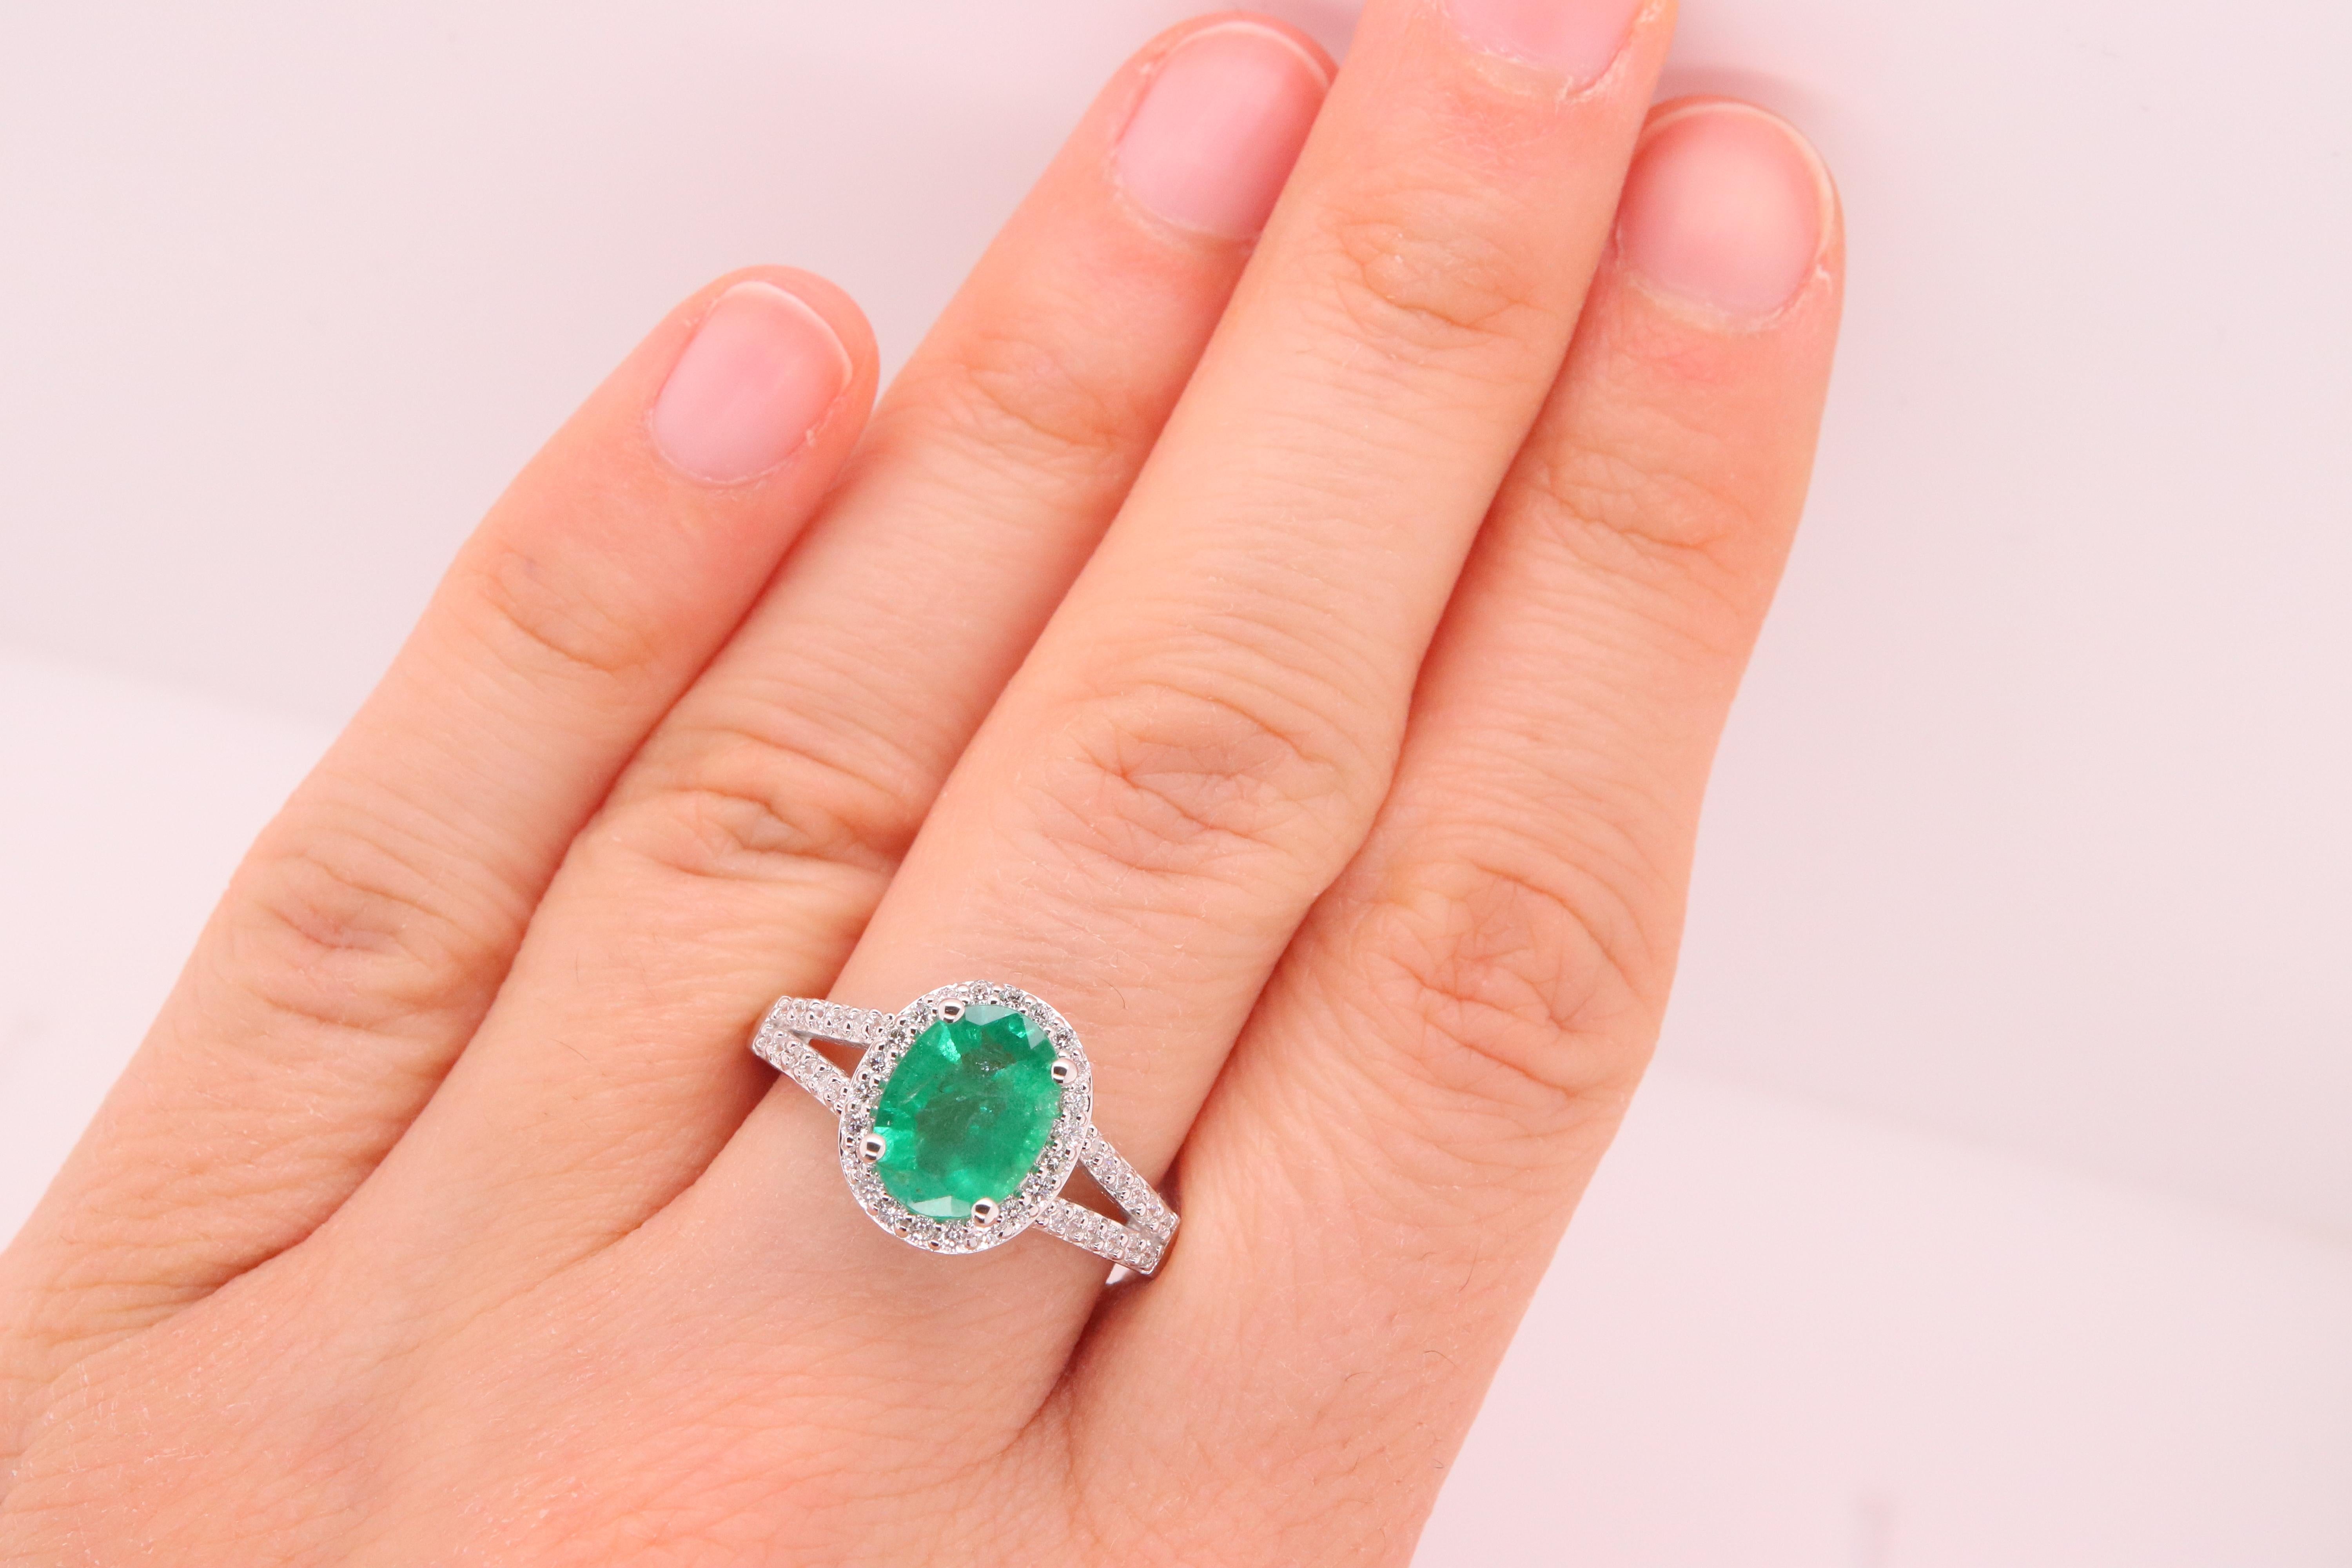 Material: 18k White Gold 
Center Stone Details: 1 Oval Emerald at 1.37 Carats - Measuring 9 x 7 mm
Diamond Details: 46 Brilliant Round Diamonds at 0.36 Carats - Clarity: SI / Color: H-I
Ring Size: 7. Alberto offers complimentary sizing on all